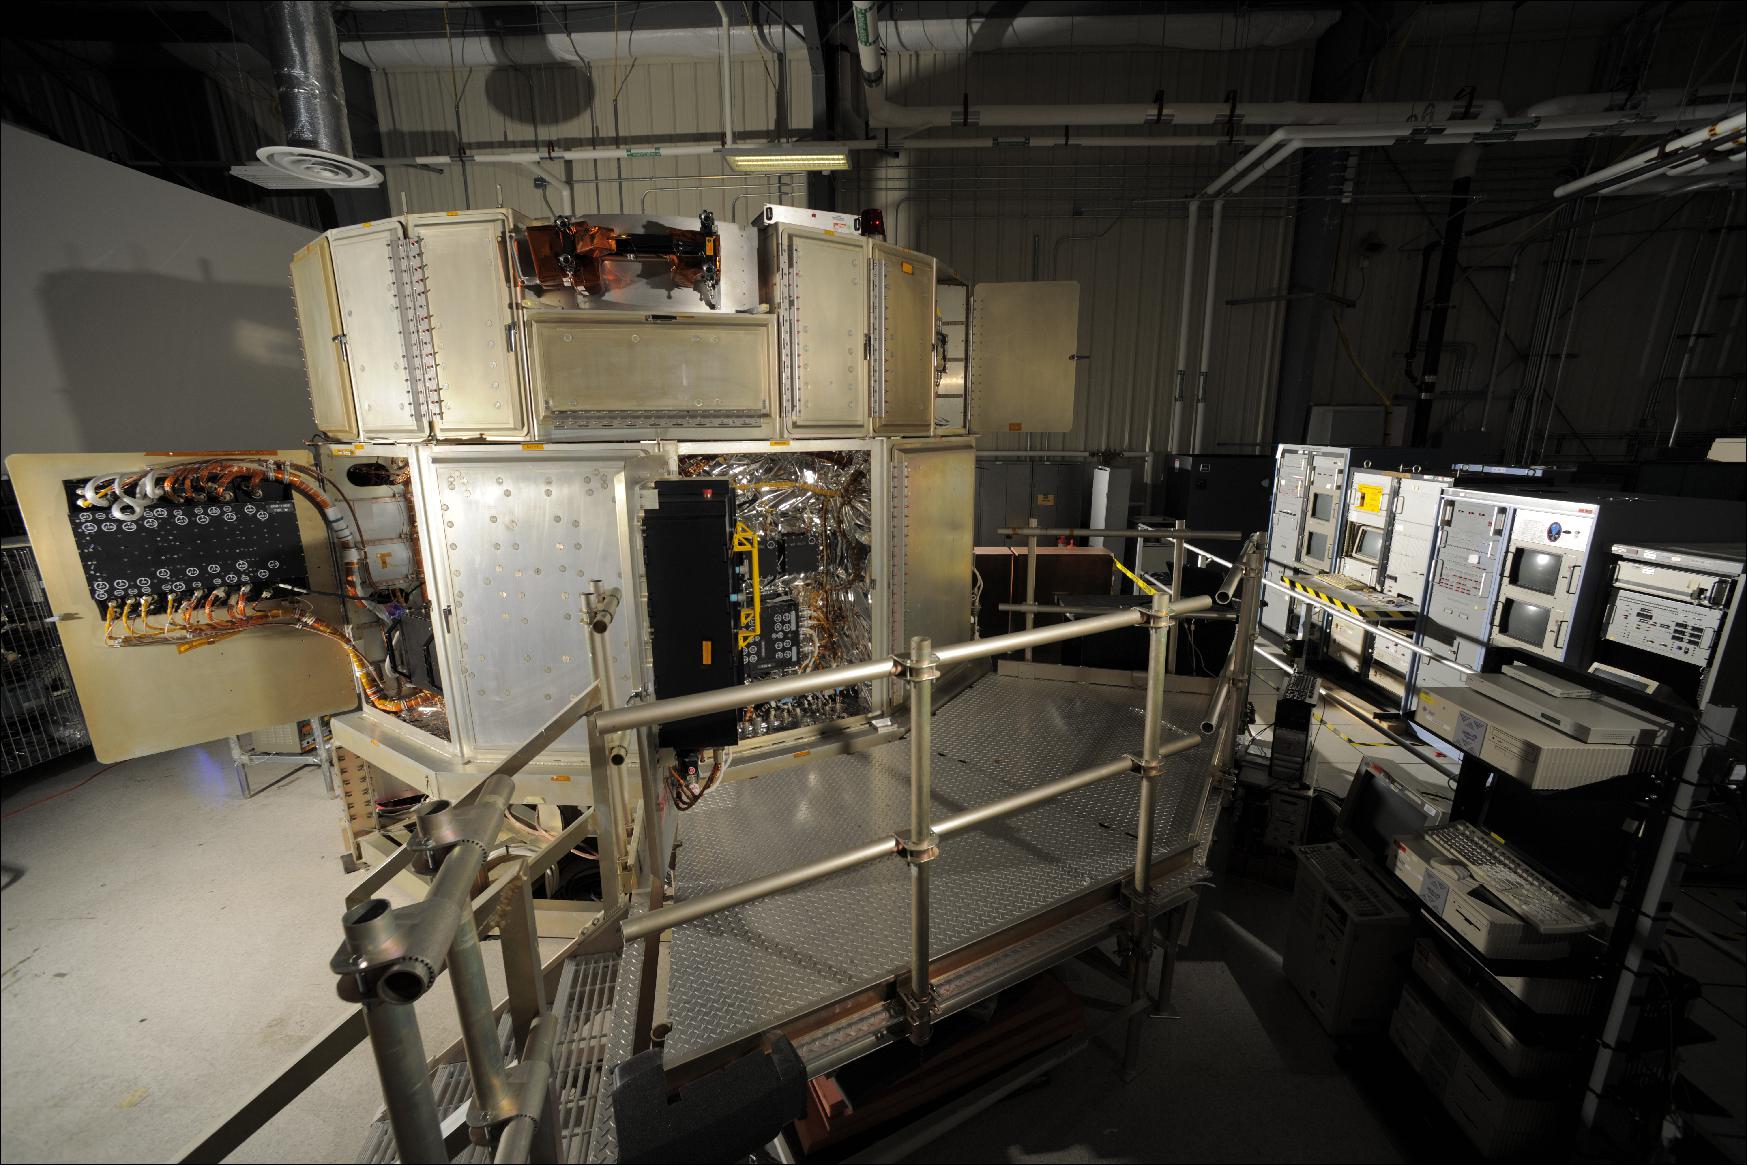 Figure 76: The VEST facility uses both hardware and software simulators to replicate the operation of the Hubble observatory in orbit. In this view, the main VEST structure is seen on the left, while ancillary equipment, including some of the instrument benches, appear on the right (image credit: NASA)